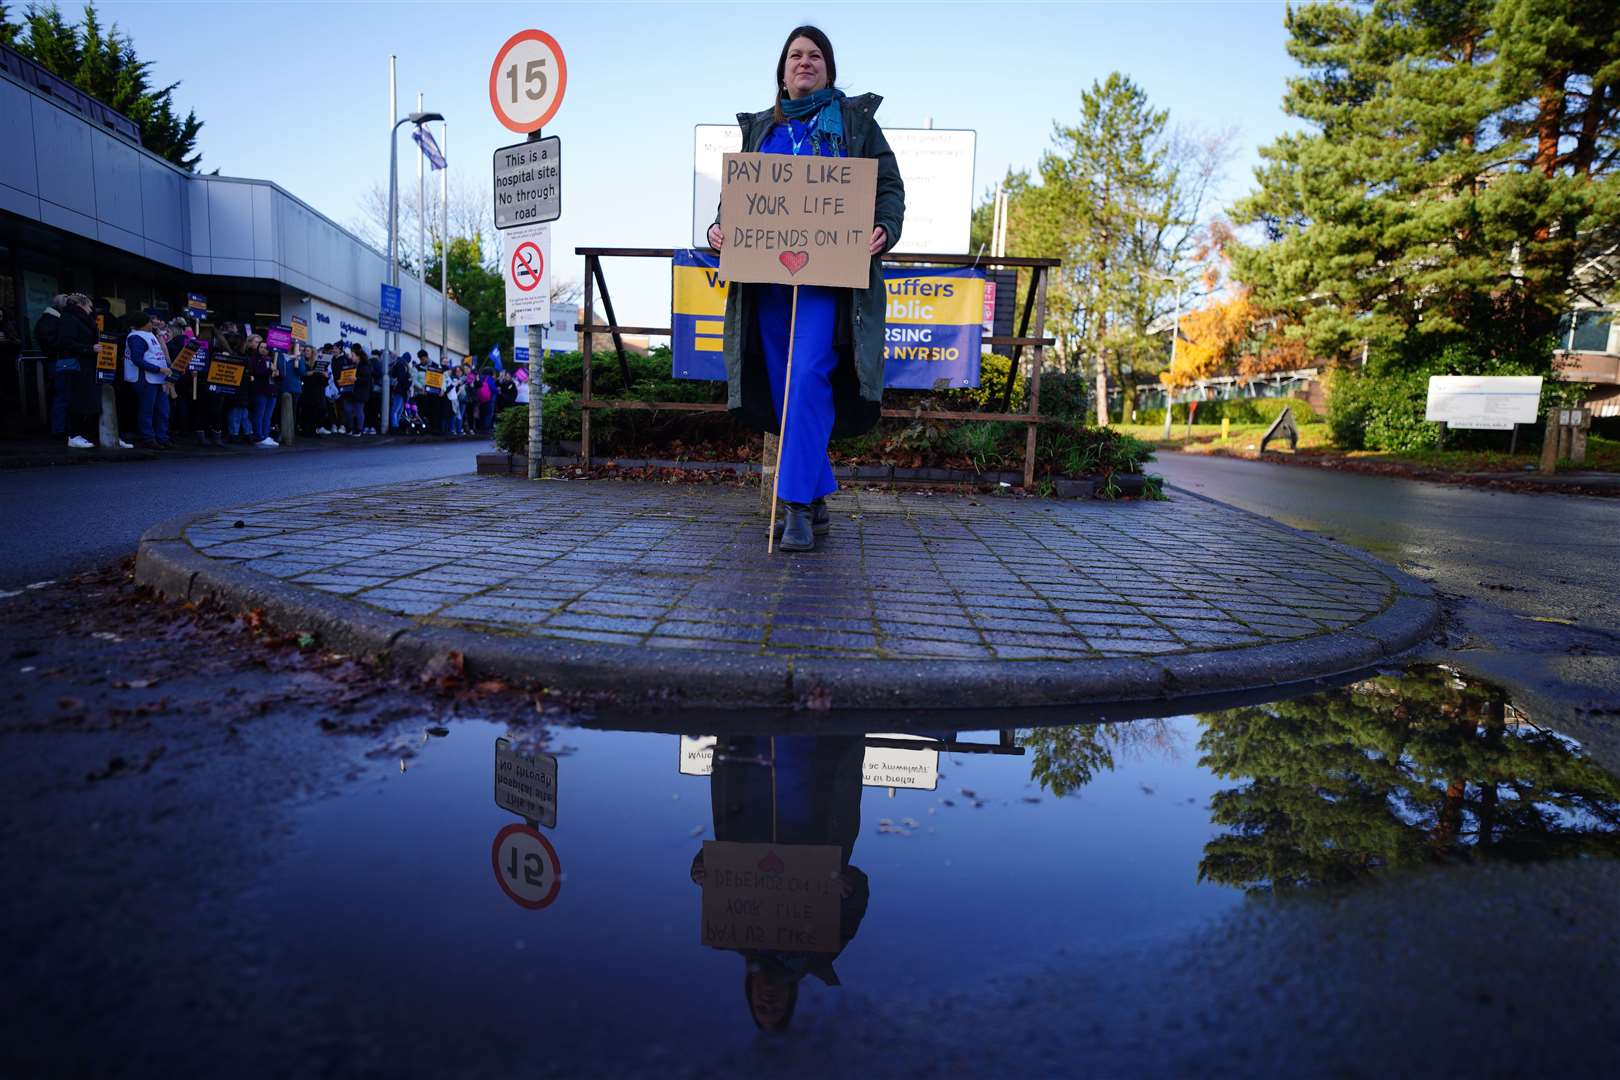 Madelaine Watkins joins members of the Royal College of Nursing on the picket line outside the RCN offices by Cardiff University Hospital, as nurses in England, Wales and Northern Ireland take industrial action over pay (Ben Birchall/PA)